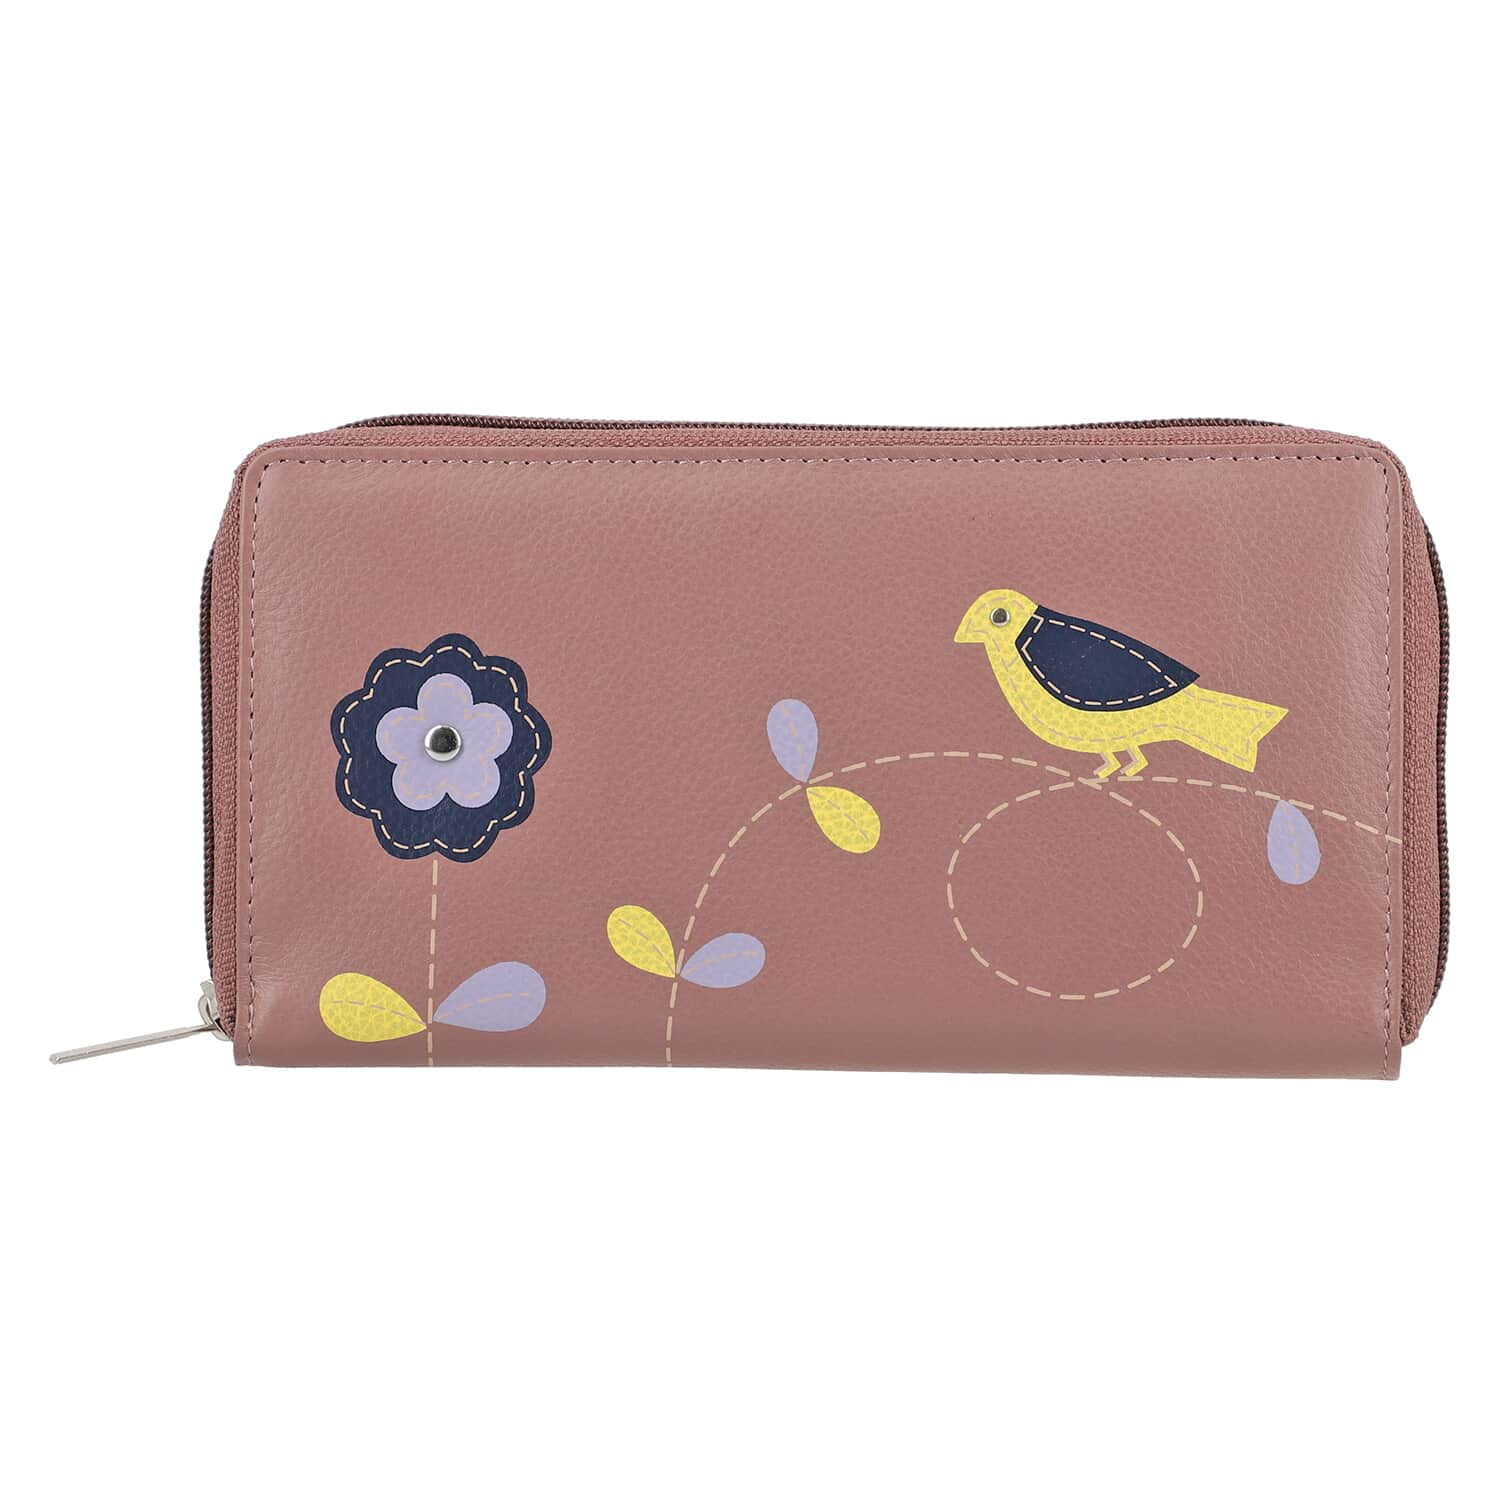 Shop LC Purple Color Flower Pattern 100 Genuine Leather RFID Protected Applique Women s Wallet Birthday Gifts 0eee57c1 c410 48bd 9aff afe27cfcda34.8fe2735d4349448c52e1d03490f7a200